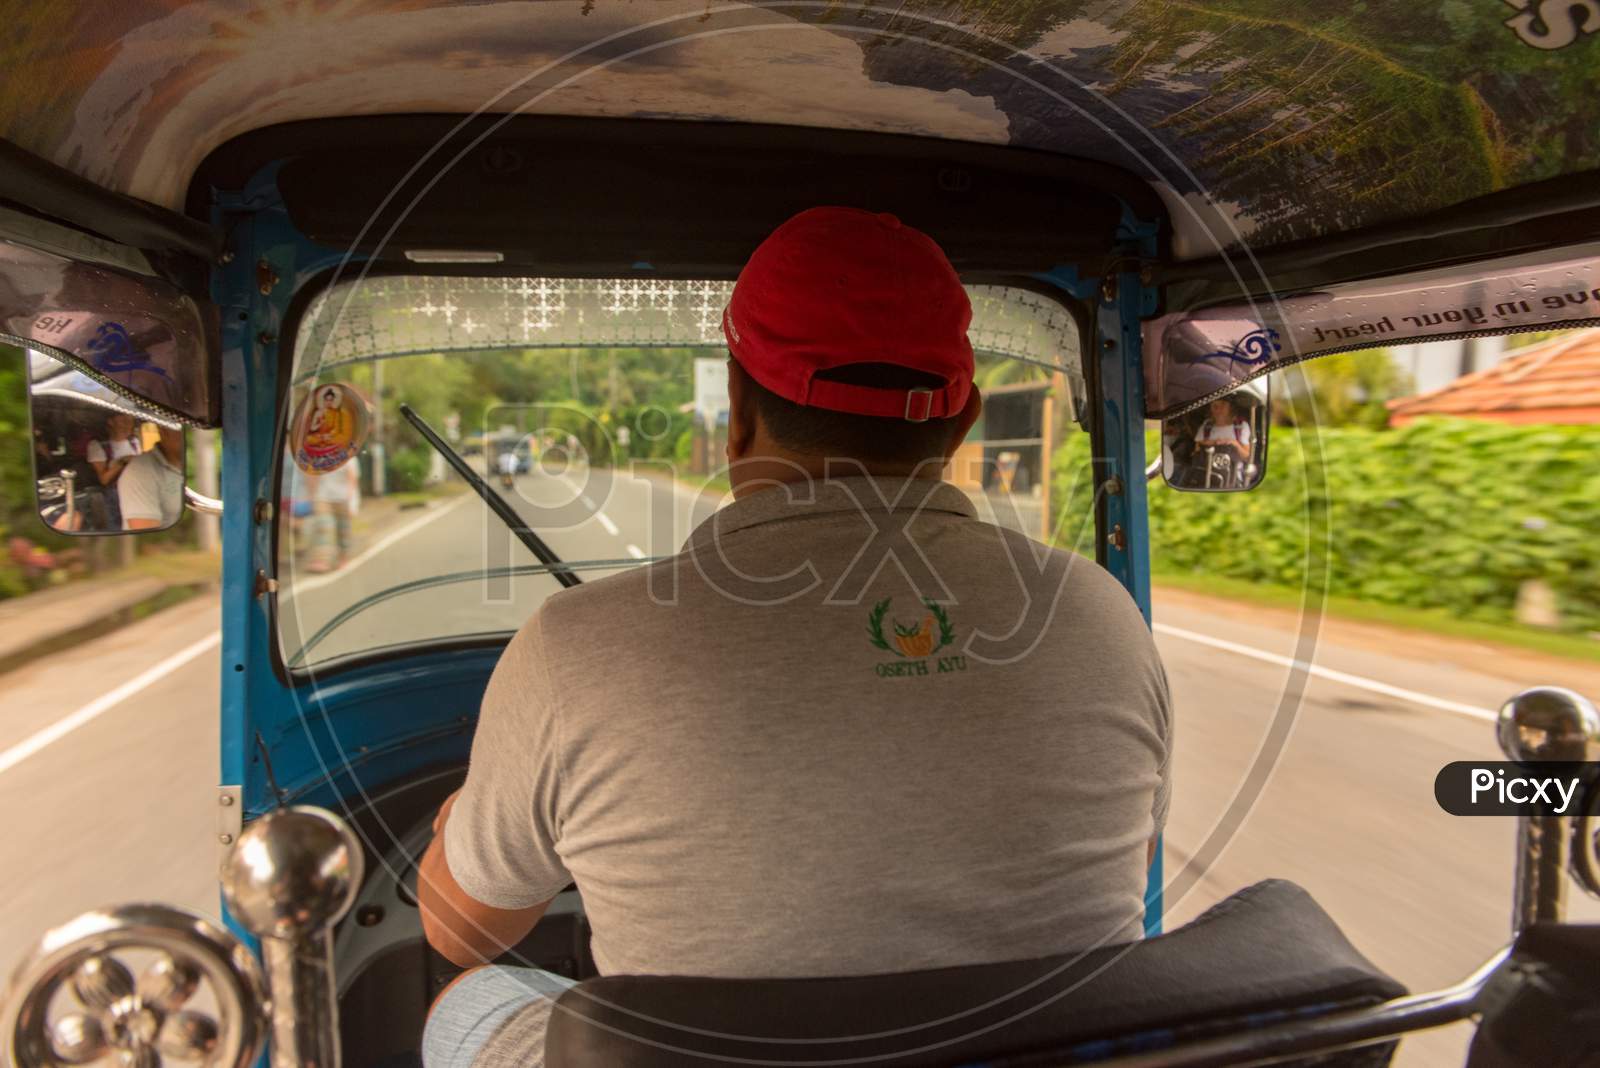 Bentota, Sri Lanka - Nov 16, 2019: The Sunny View From Inside The Tuk Tuk Taxi, Behind The Driver As It Is Driven Along A Country Road With The Passenger'S Reflection Visible In The Wing-Mirror.